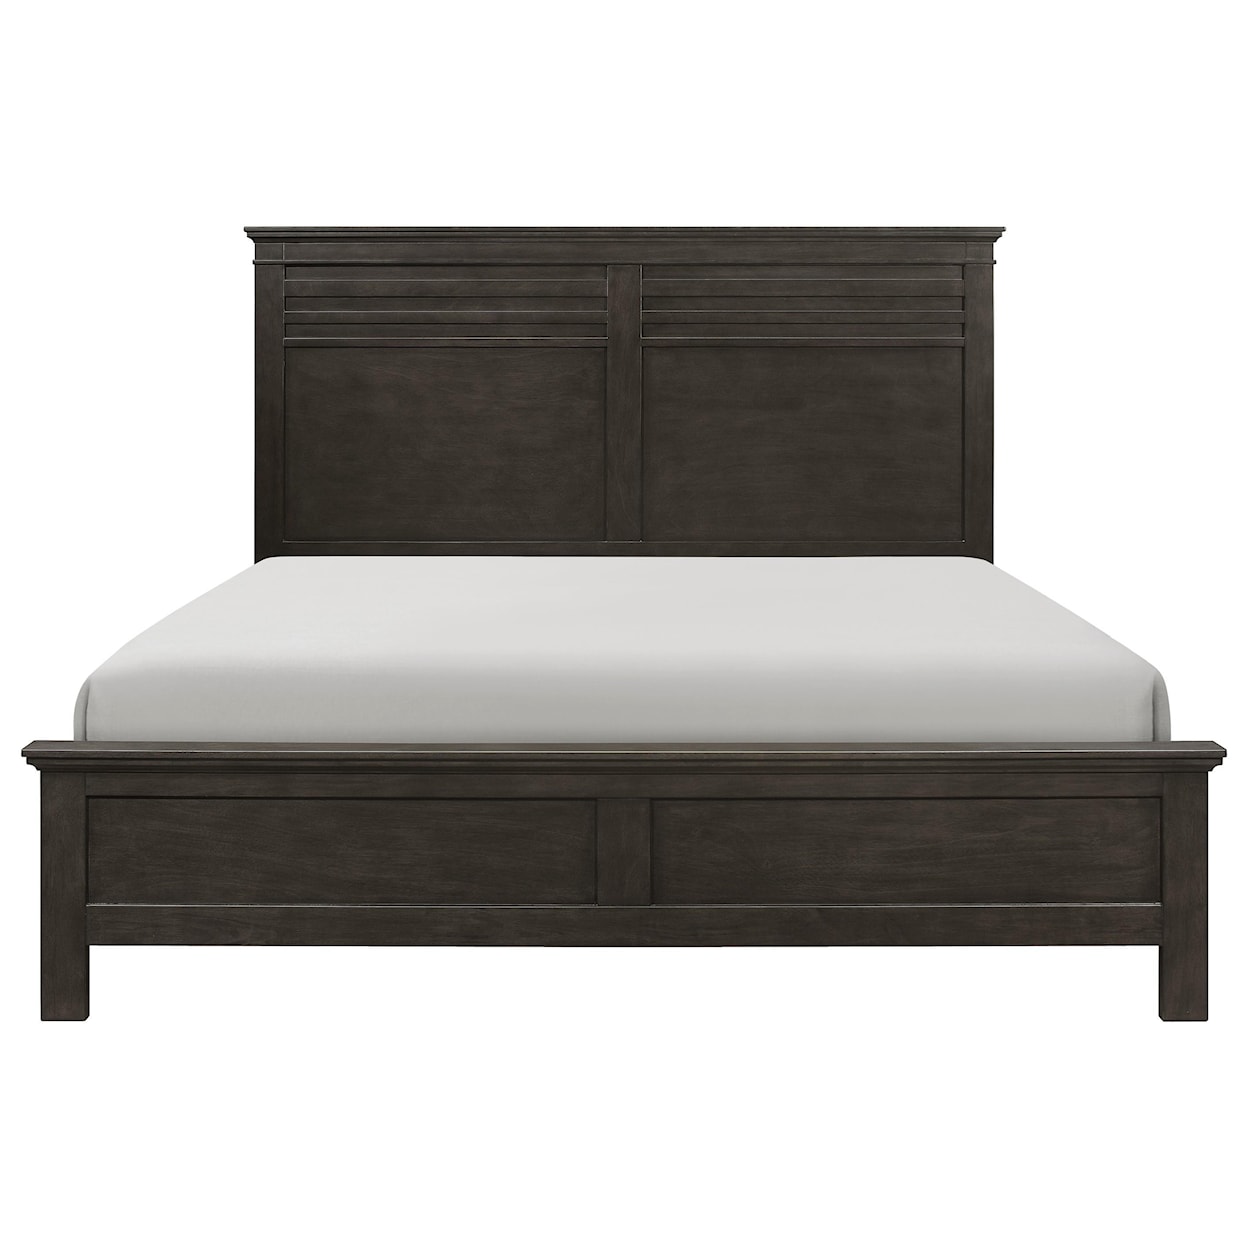 Homelegance Furniture Blaire Farm Queen Bed